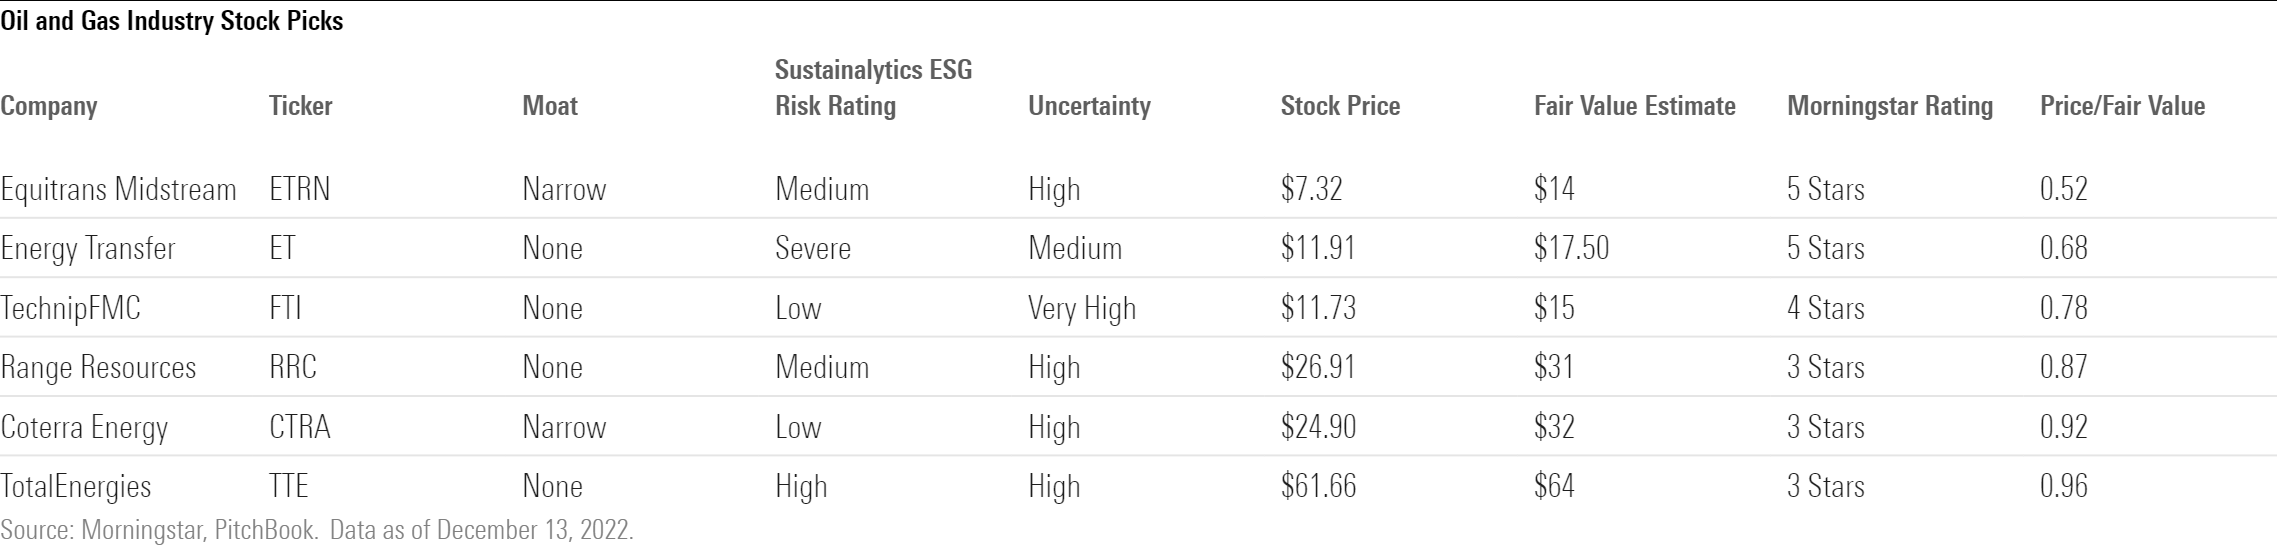 Six U.S. oil and gas stocks that are trading below their Morningstar fair value estimates.